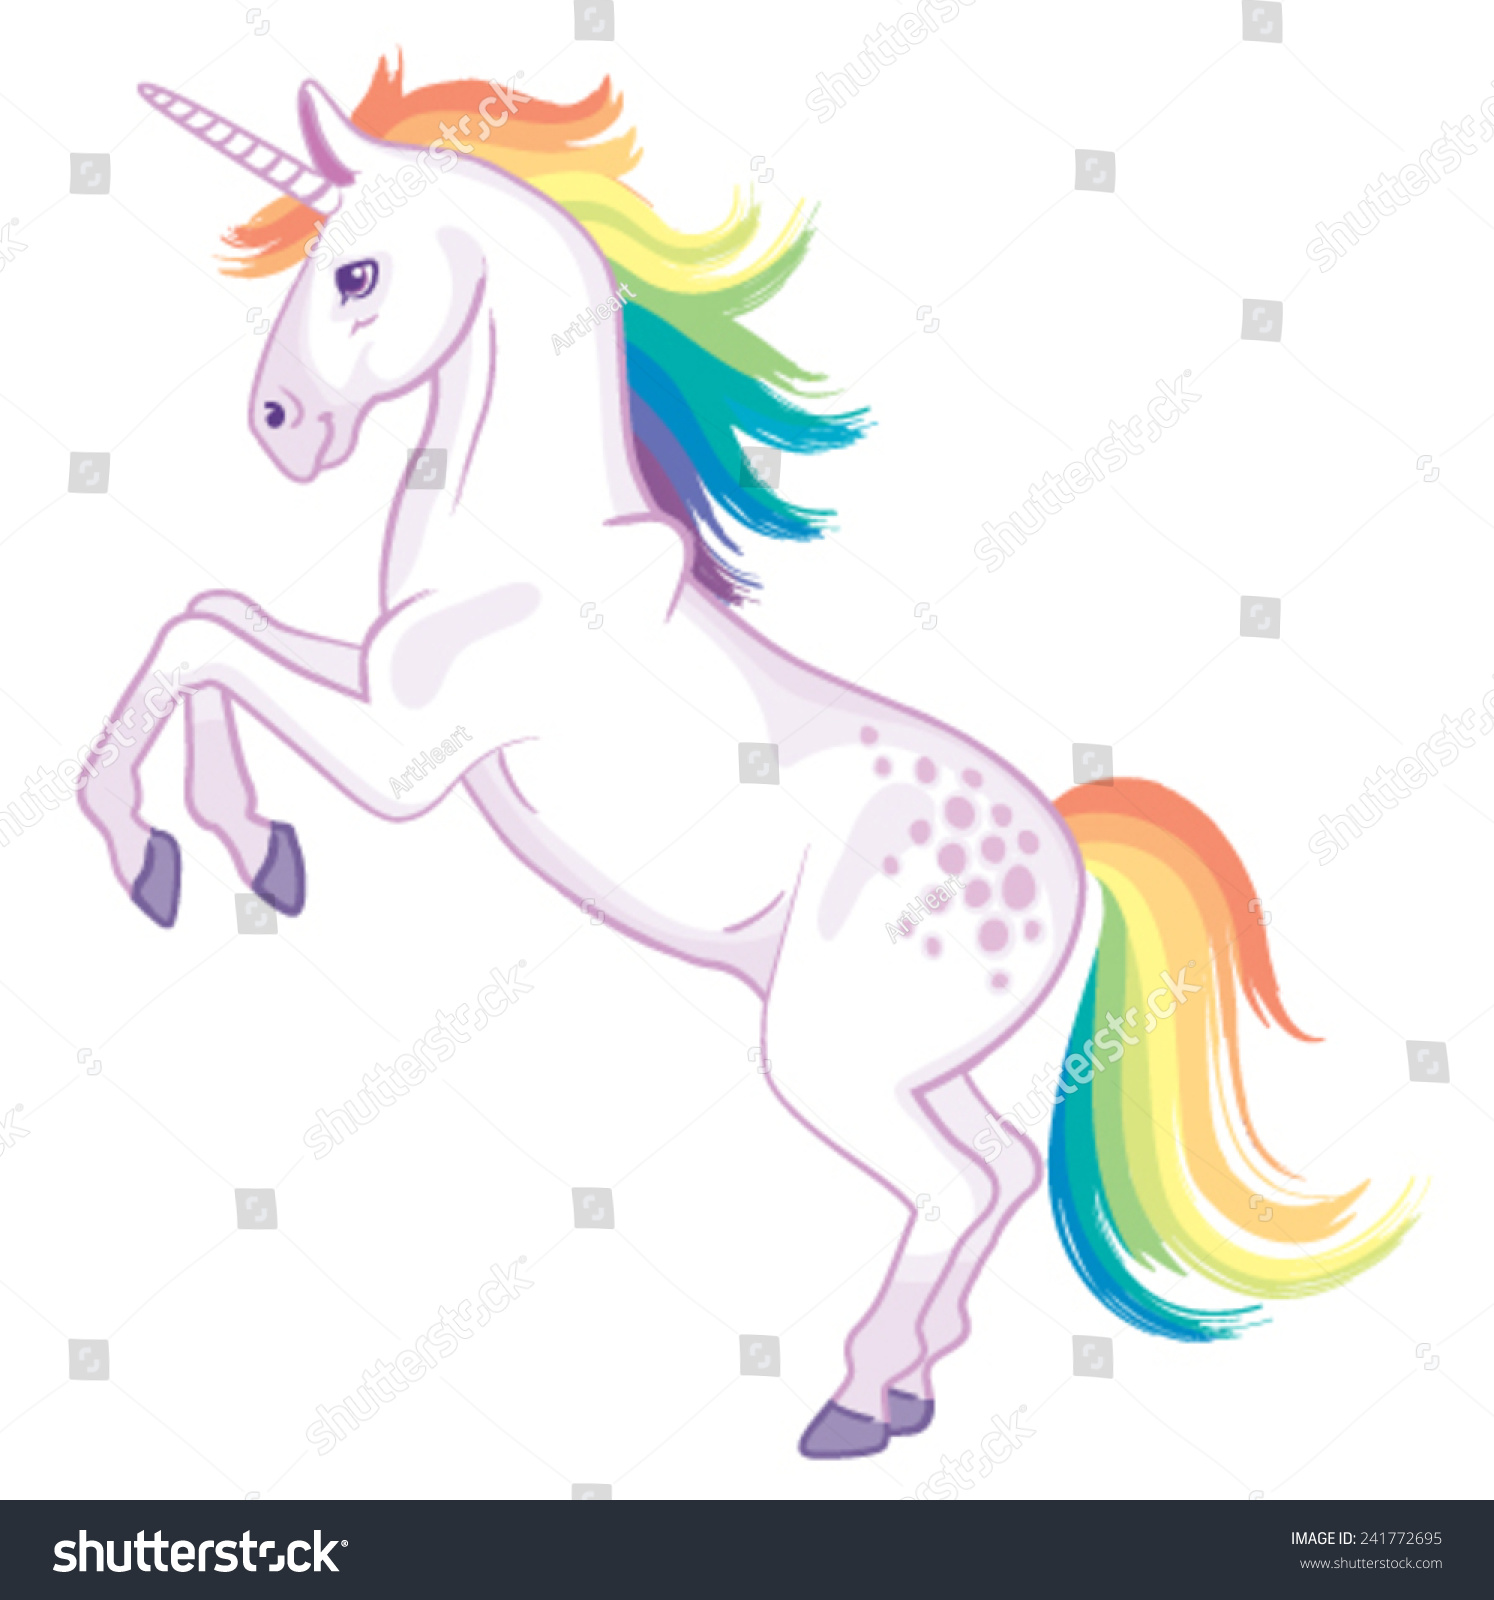 http://image.shutterstock.com/z/stock-vector-a-cartoon-unicorn-with-rainbow-mane-and-tail-rearing-up-on-its-hind-legs-241772695.jpg